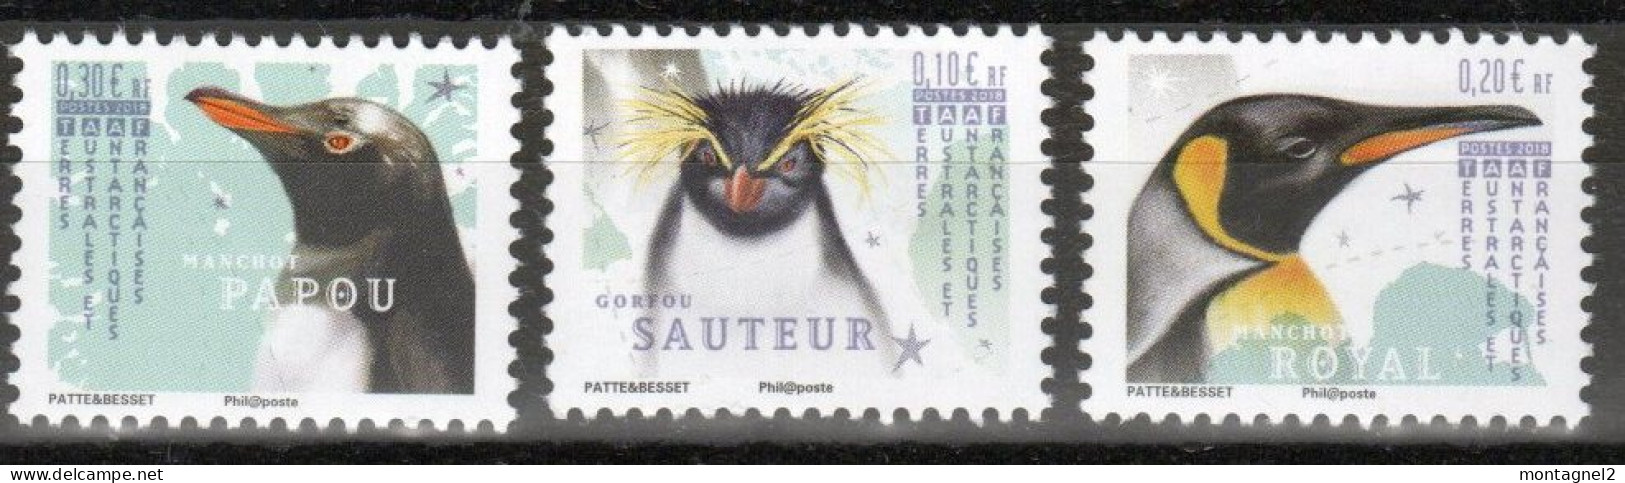 Timbre Des TAAF  N° 871 872 873 Neuf ** - Pingouins & Manchots